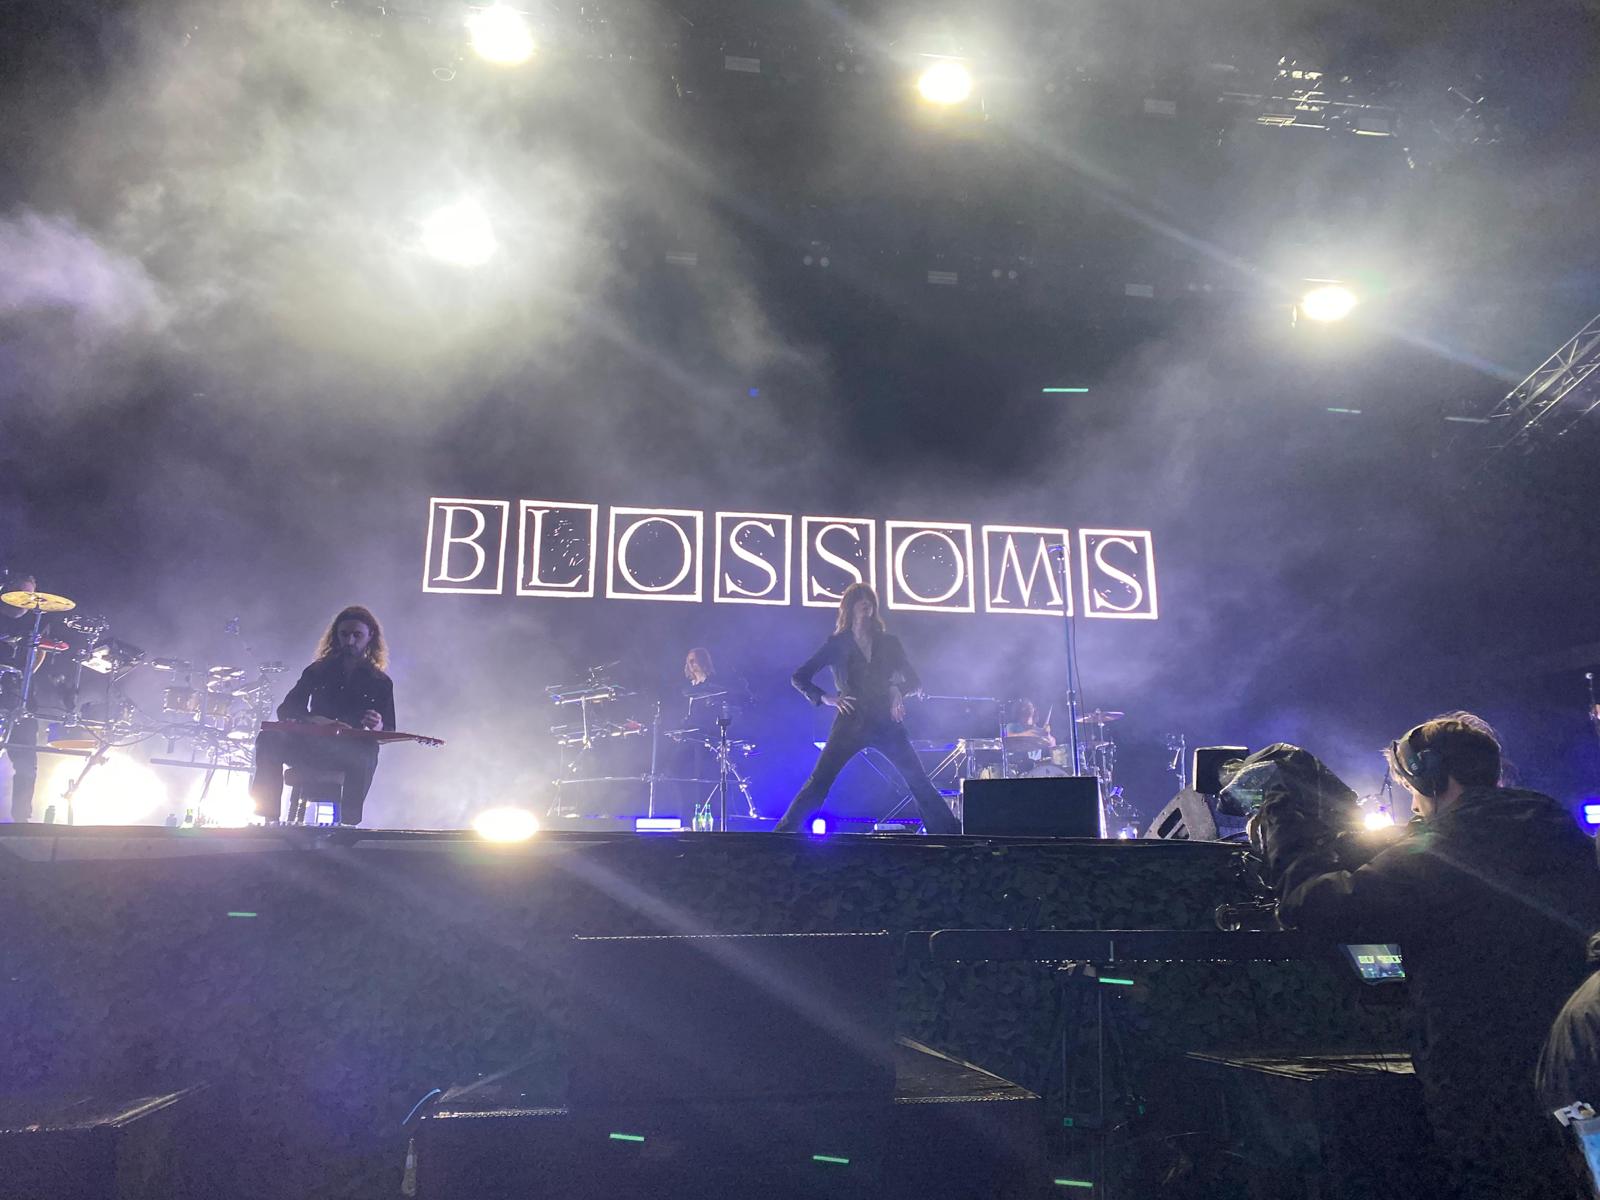 Blossoms on the main stage of Kendal Calling festival after being introduced by Andy Burnham